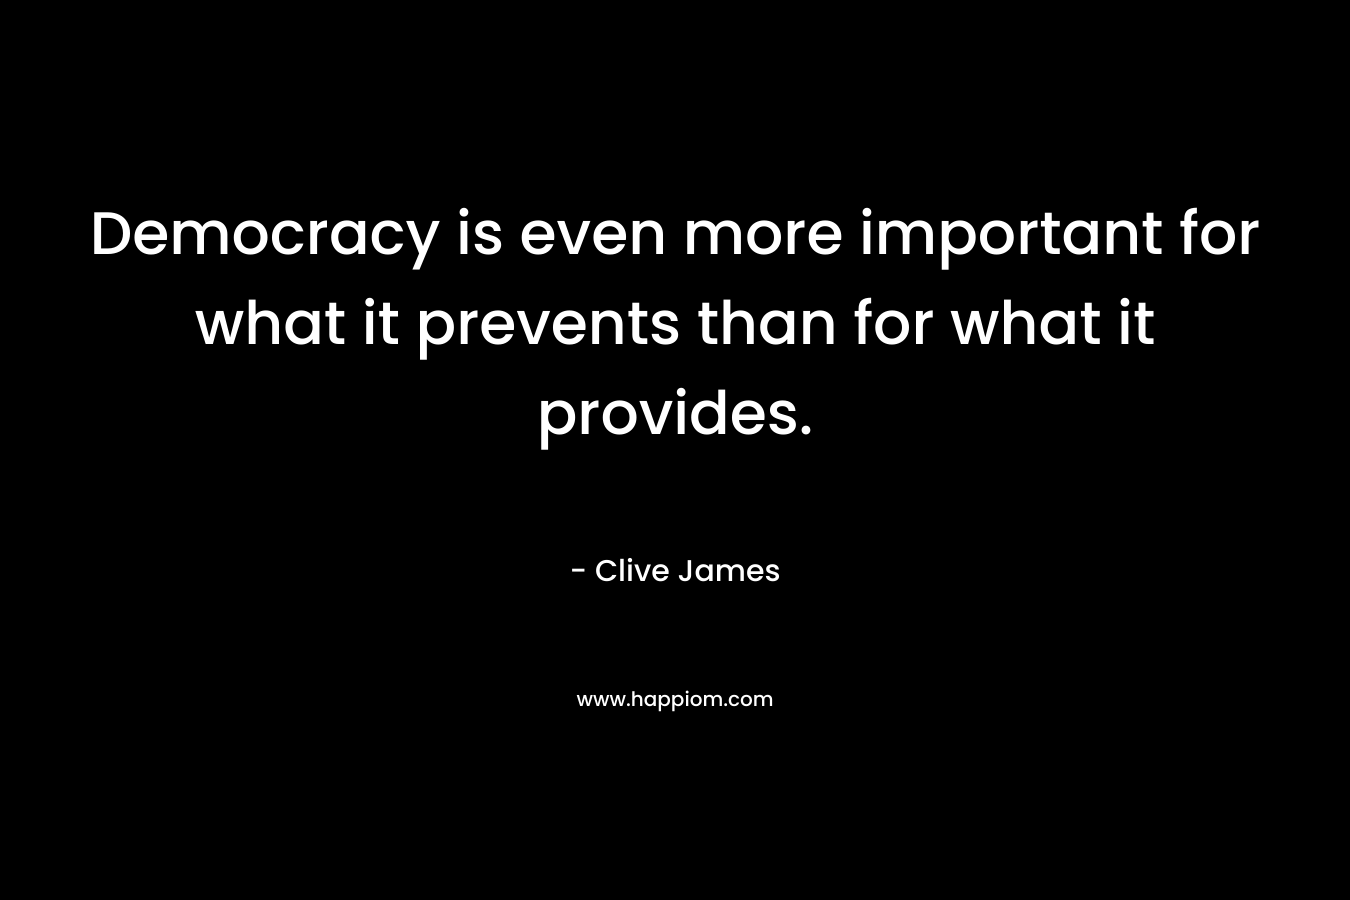 Democracy is even more important for what it prevents than for what it provides. – Clive James